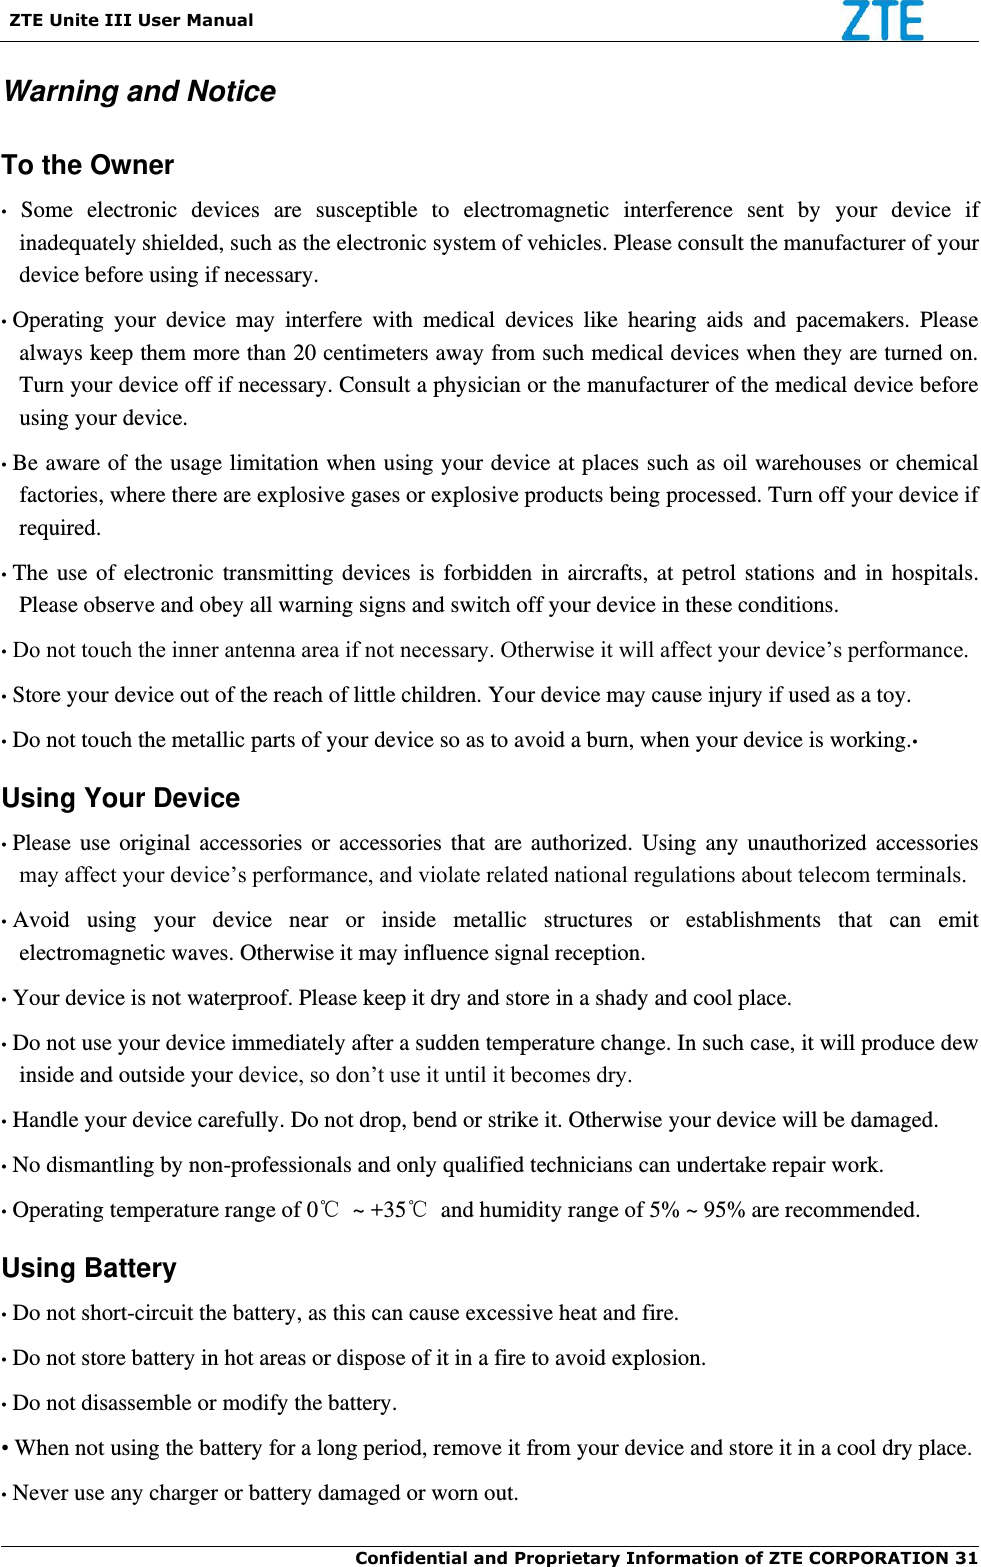   ZTE Unite III User Manual  Confidential and Proprietary Information of ZTE CORPORATION 31   Warning and Notice To the Owner •  Some  electronic  devices  are  susceptible  to  electromagnetic  interference  sent  by  your  device  if inadequately shielded, such as the electronic system of vehicles. Please consult the manufacturer of your device before using if necessary. • Operating  your  device  may  interfere  with  medical  devices  like  hearing  aids  and  pacemakers.  Please always keep them more than 20 centimeters away from such medical devices when they are turned on. Turn your device off if necessary. Consult a physician or the manufacturer of the medical device before using your device. • Be aware of the usage limitation when using your device at places such as oil warehouses or chemical factories, where there are explosive gases or explosive products being processed. Turn off your device if required. • The use of electronic transmitting devices is  forbidden in aircrafts, at petrol stations and in hospitals. Please observe and obey all warning signs and switch off your device in these conditions. • Do not touch the inner antenna area if not necessary. Otherwise it will affect your device’s performance. • Store your device out of the reach of little children. Your device may cause injury if used as a toy. • Do not touch the metallic parts of your device so as to avoid a burn, when your device is working.•  Using Your Device • Please use  original accessories  or accessories  that are  authorized. Using any unauthorized accessories may affect your device’s performance, and violate related national regulations about telecom terminals. • Avoid  using  your  device  near  or  inside  metallic  structures  or  establishments  that  can  emit electromagnetic waves. Otherwise it may influence signal reception. • Your device is not waterproof. Please keep it dry and store in a shady and cool place. • Do not use your device immediately after a sudden temperature change. In such case, it will produce dew inside and outside your device, so don’t use it until it becomes dry. • Handle your device carefully. Do not drop, bend or strike it. Otherwise your device will be damaged. • No dismantling by non-professionals and only qualified technicians can undertake repair work. • Operating temperature range of 0℃  ~ +35℃  and humidity range of 5% ~ 95% are recommended. Using Battery • Do not short-circuit the battery, as this can cause excessive heat and fire. • Do not store battery in hot areas or dispose of it in a fire to avoid explosion. • Do not disassemble or modify the battery. • When not using the battery for a long period, remove it from your device and store it in a cool dry place. • Never use any charger or battery damaged or worn out. 